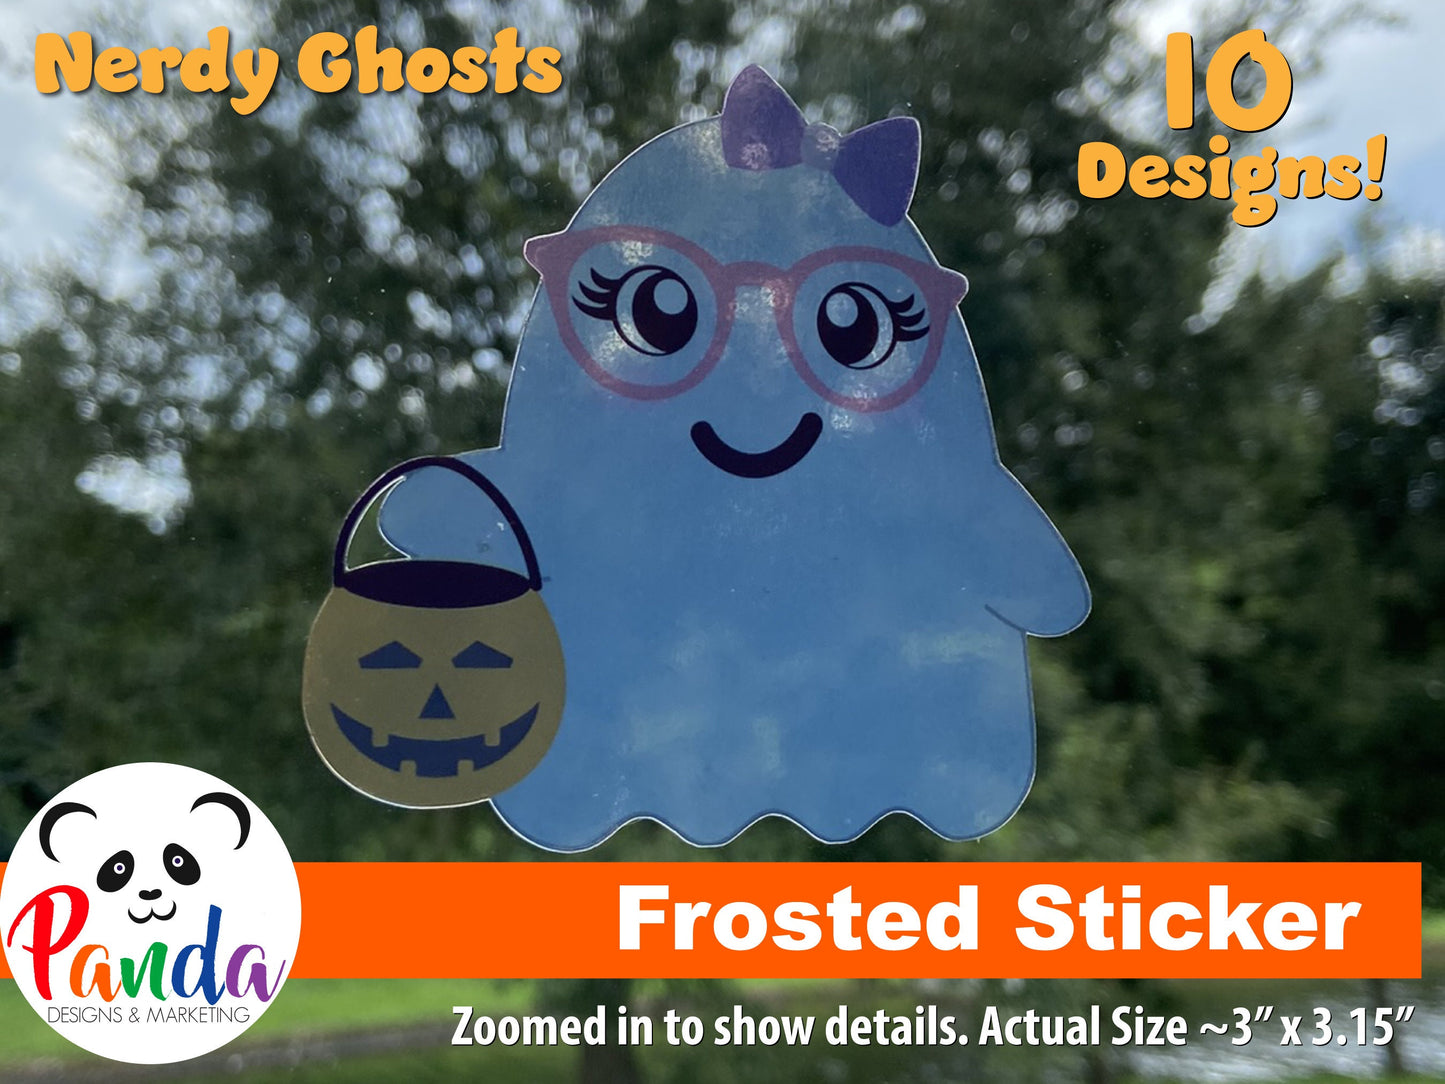 Nerdy Ghost Vinyl Stickers! 10 designs. Water resistant, cute halloween ghosts with glasses, dapper, book lover, decal, gamer, mom and dad.